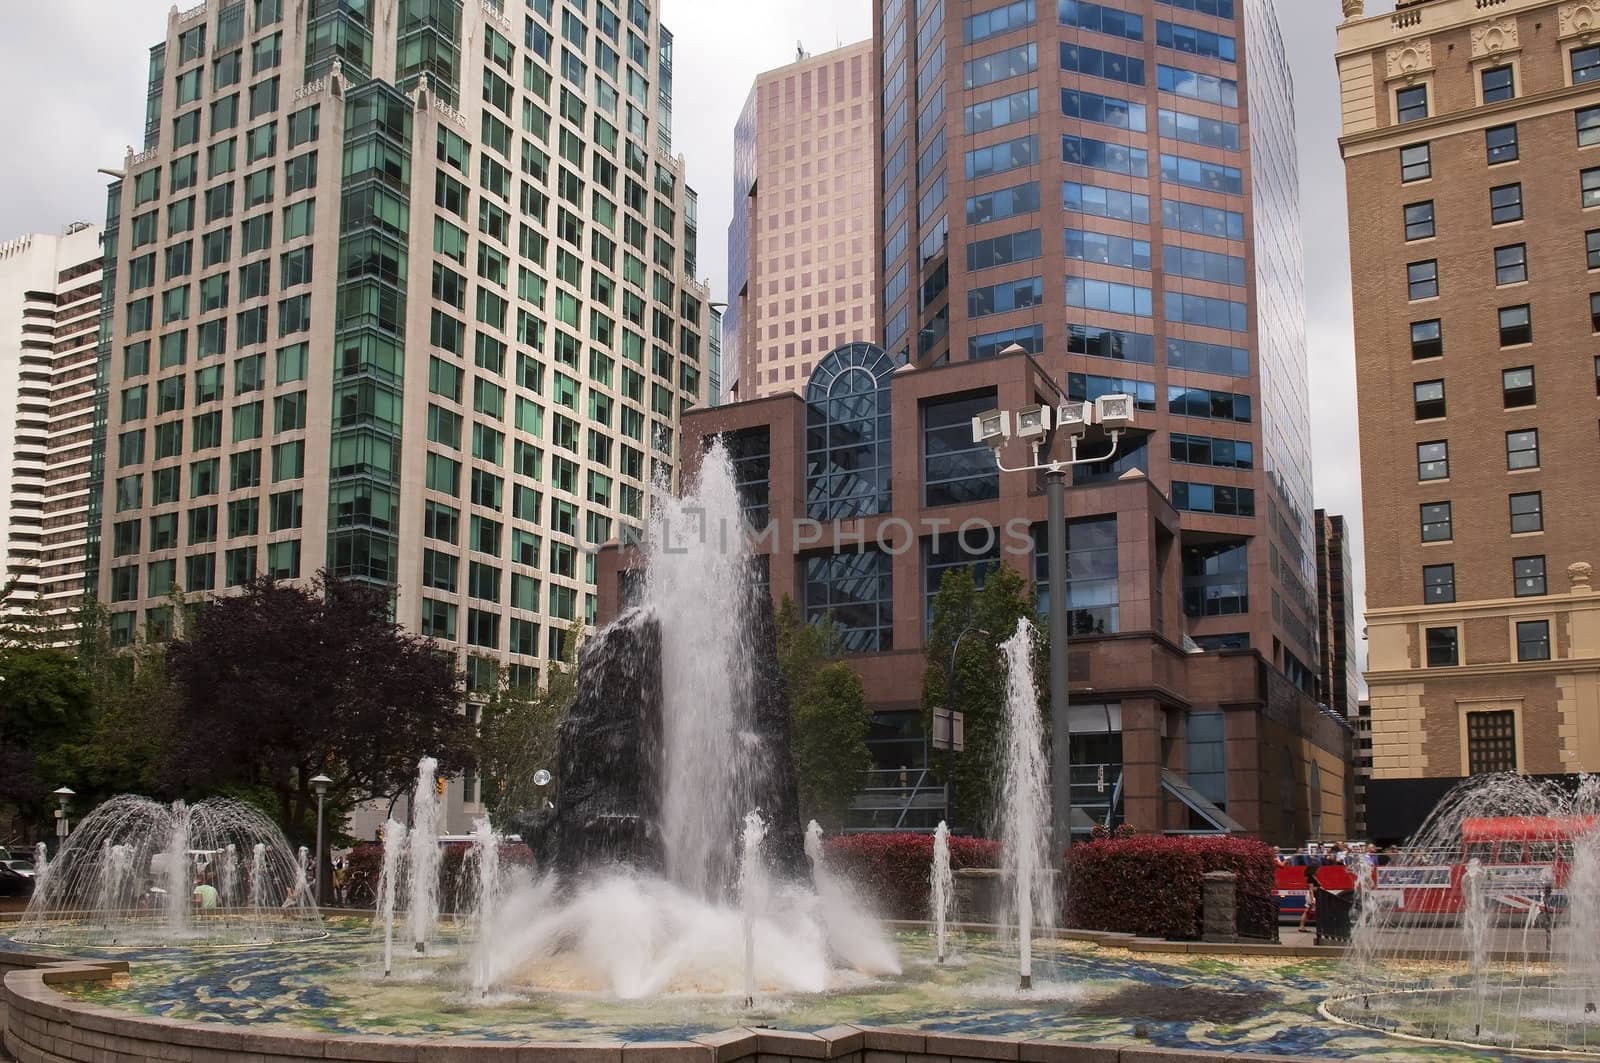 Fountain among skyscrapers, Vancouver, Canada